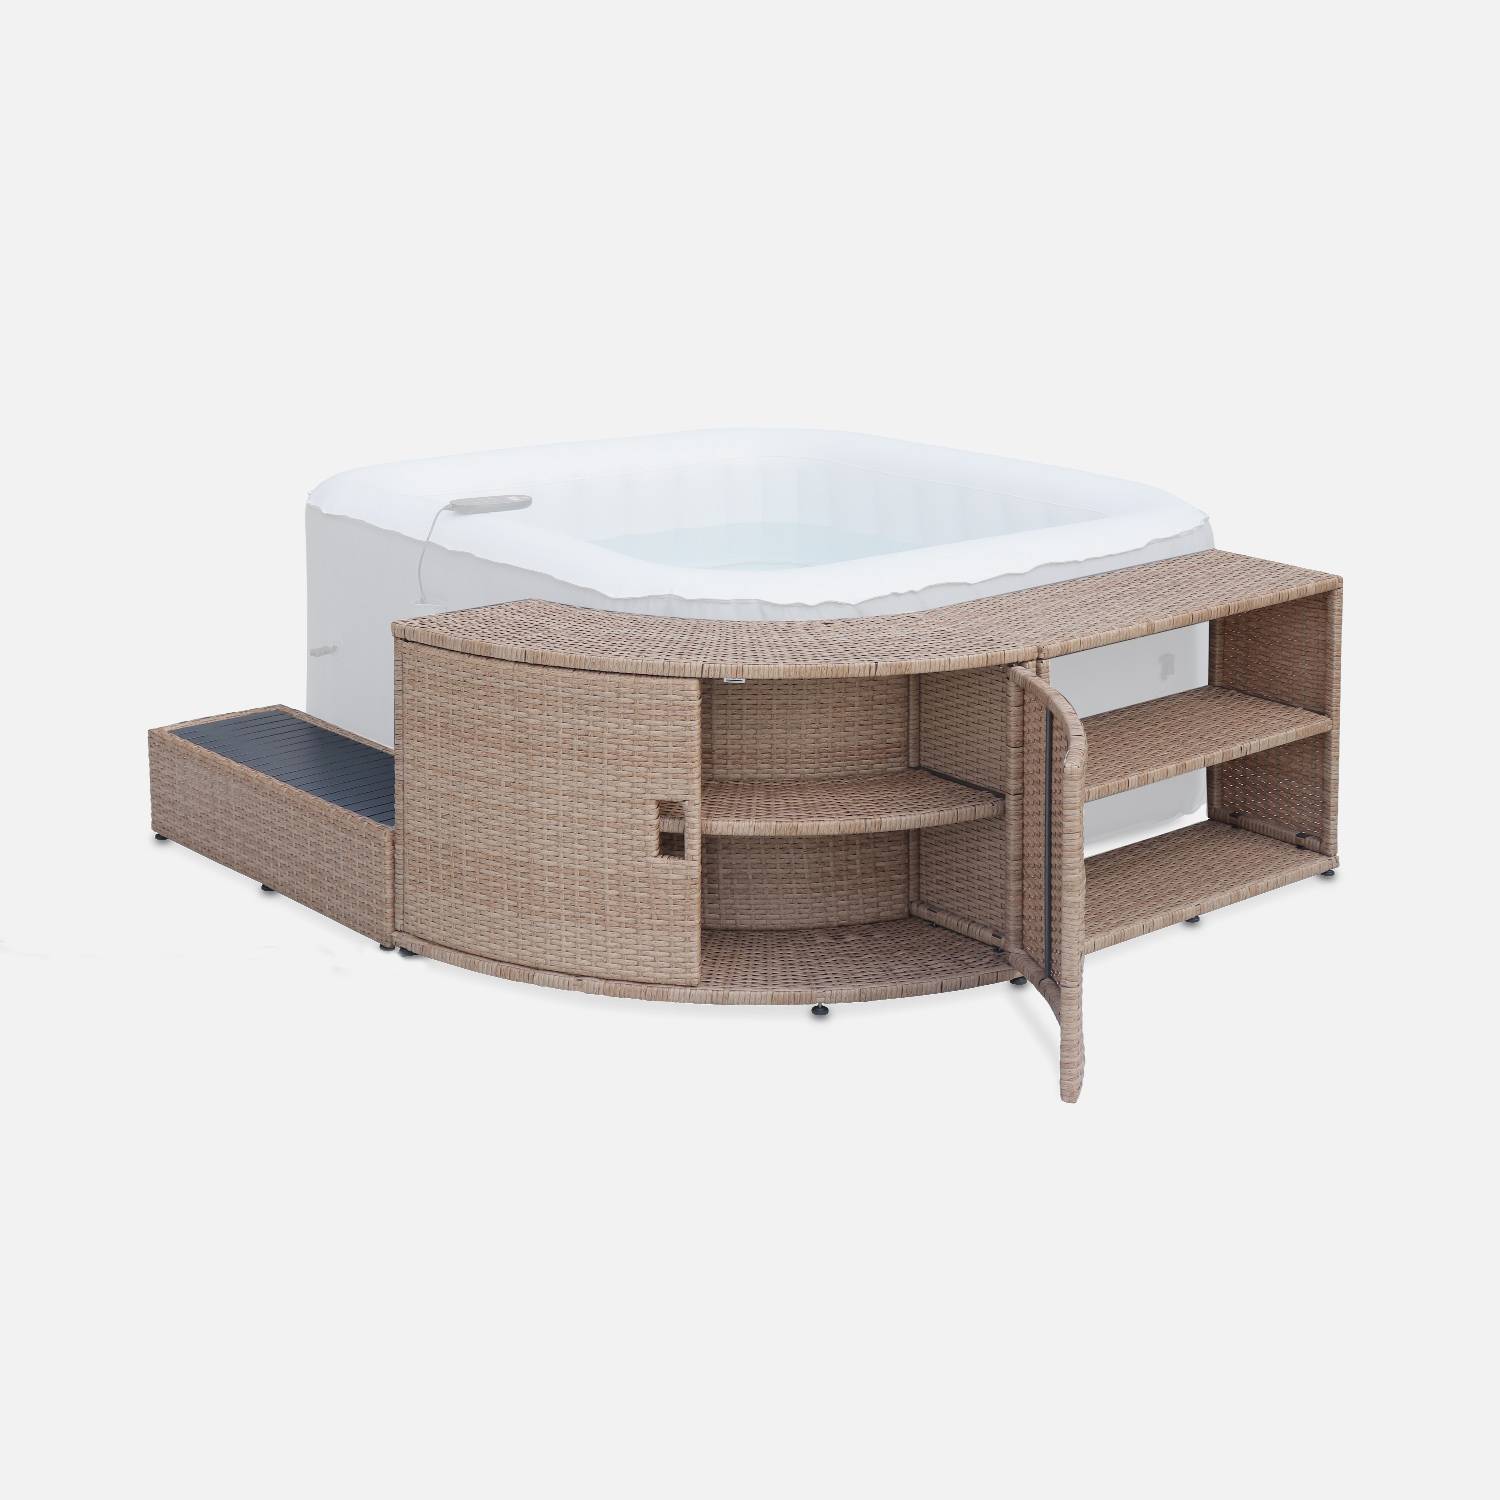 Natural polyrattan surround for square hot tub with cabinet, shelf and footstep,sweeek,Photo2